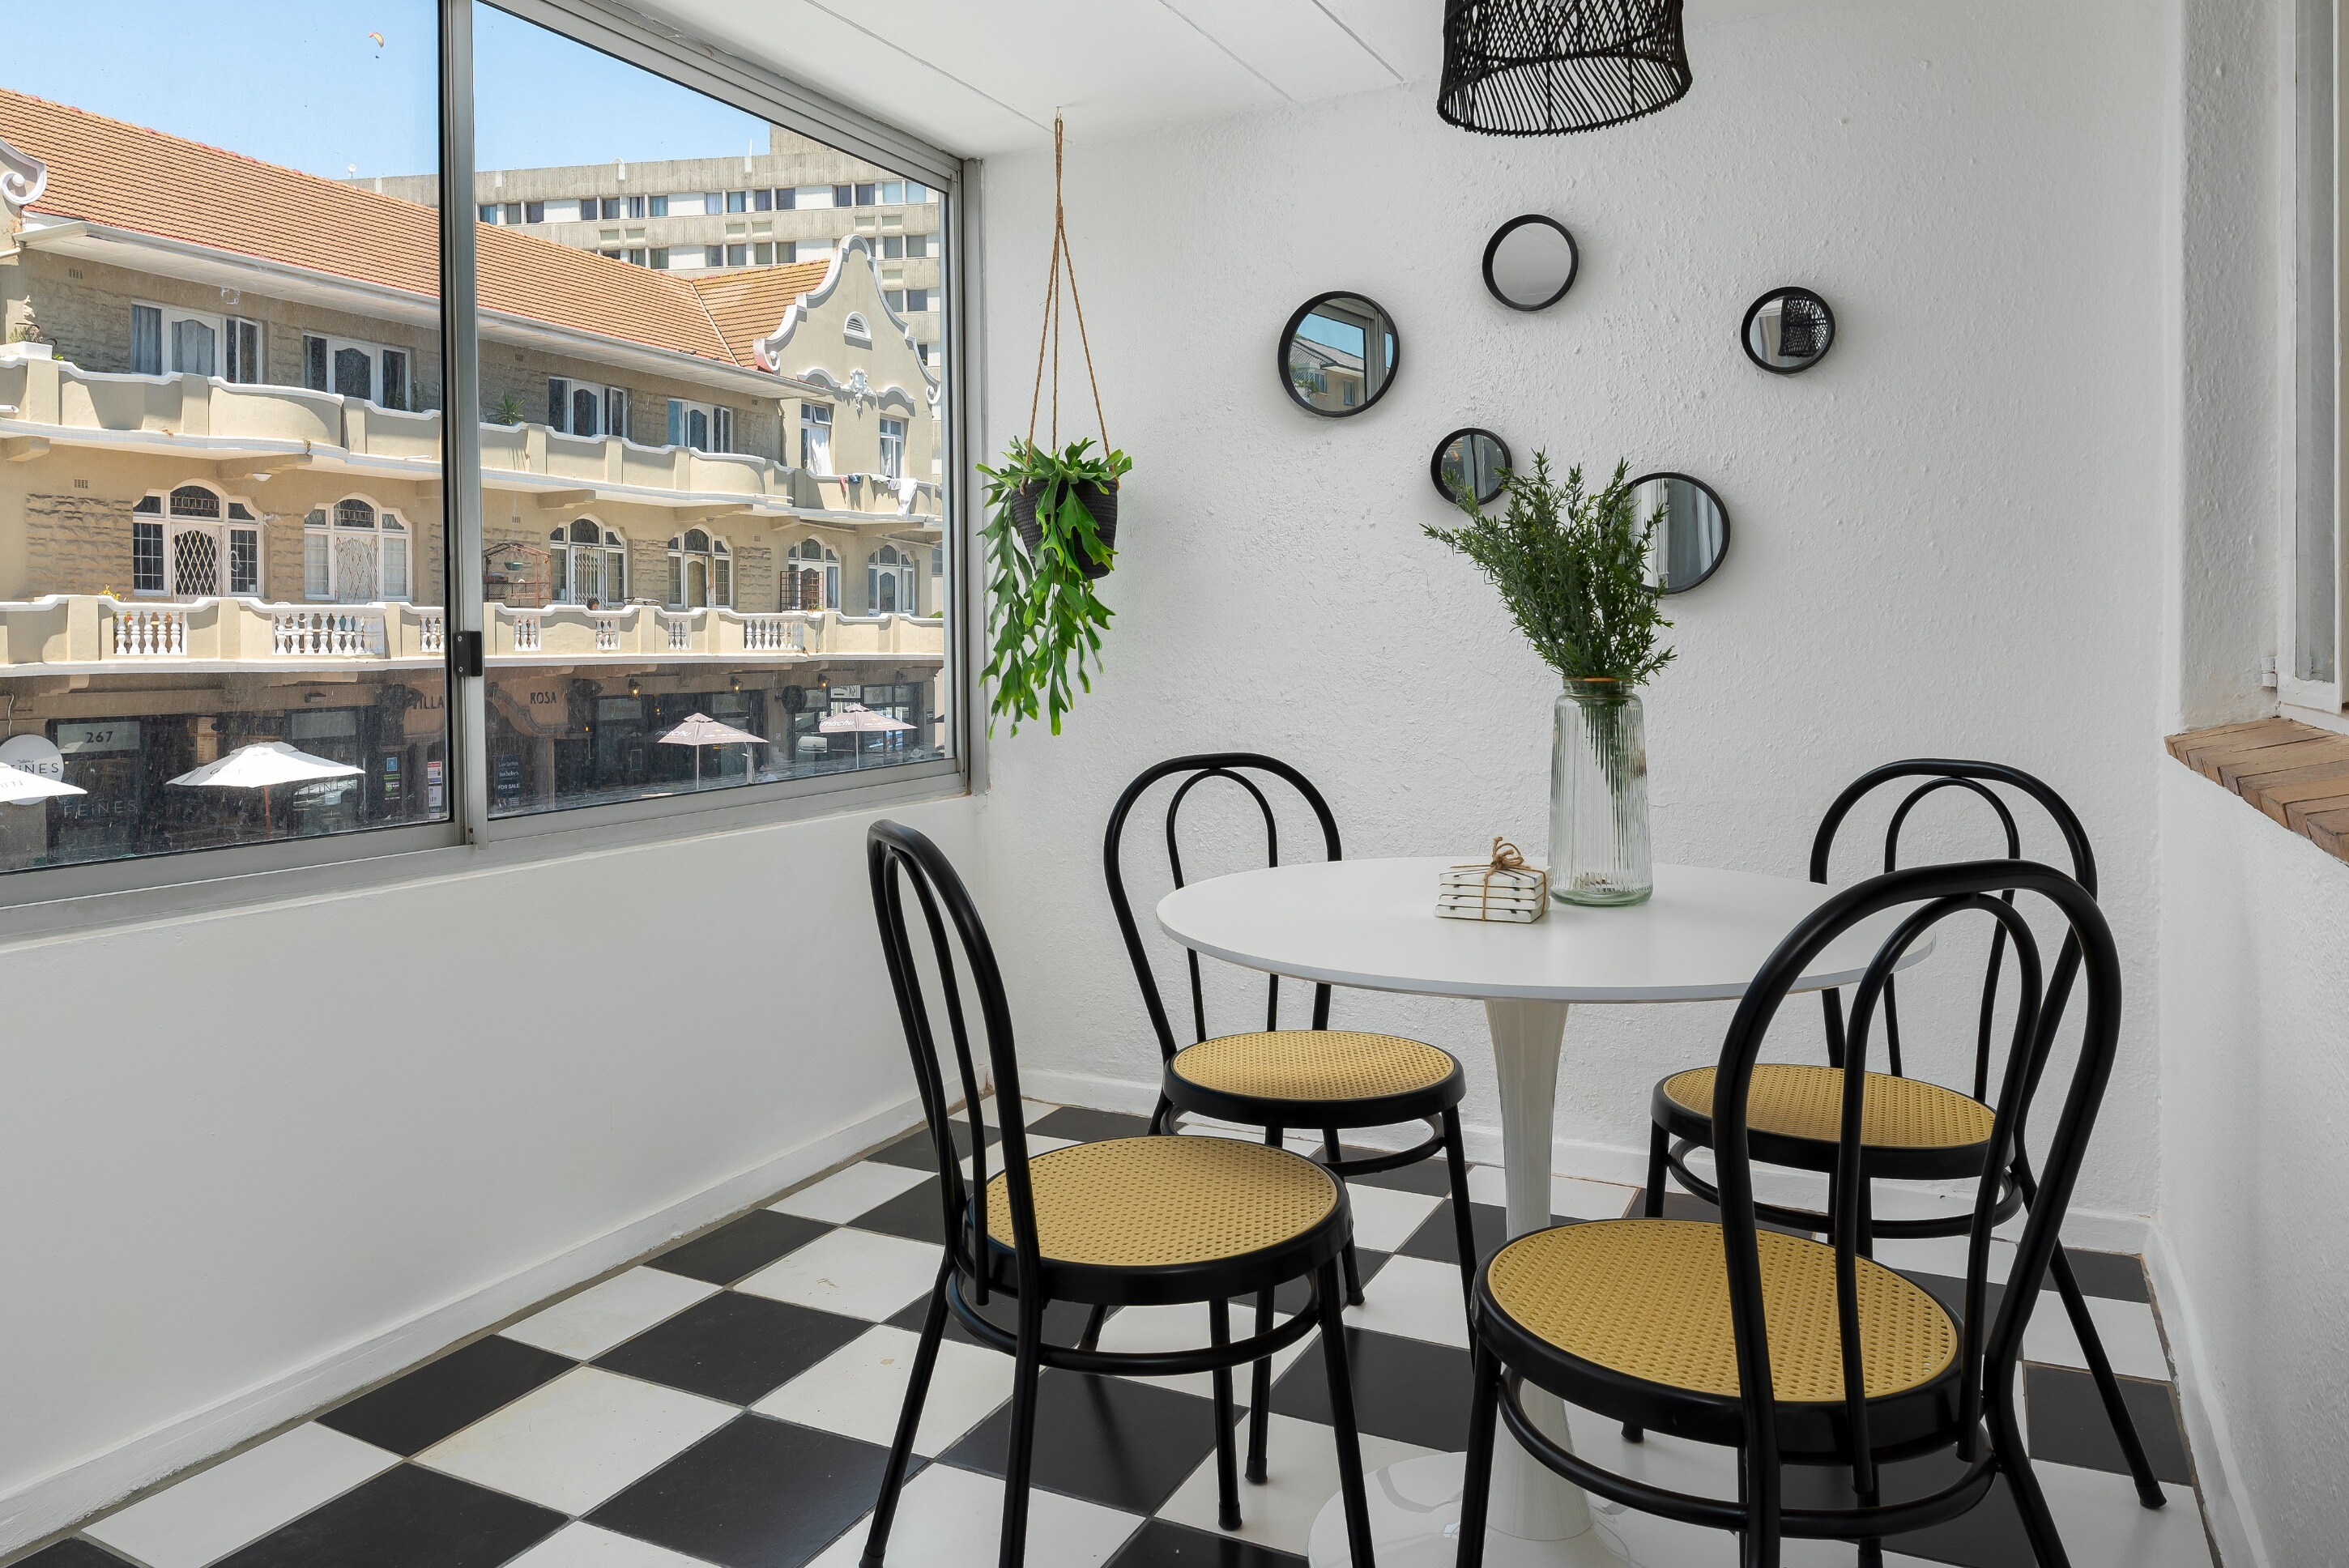 Property Image 2 - Retro Chic living in heart of Sea Point